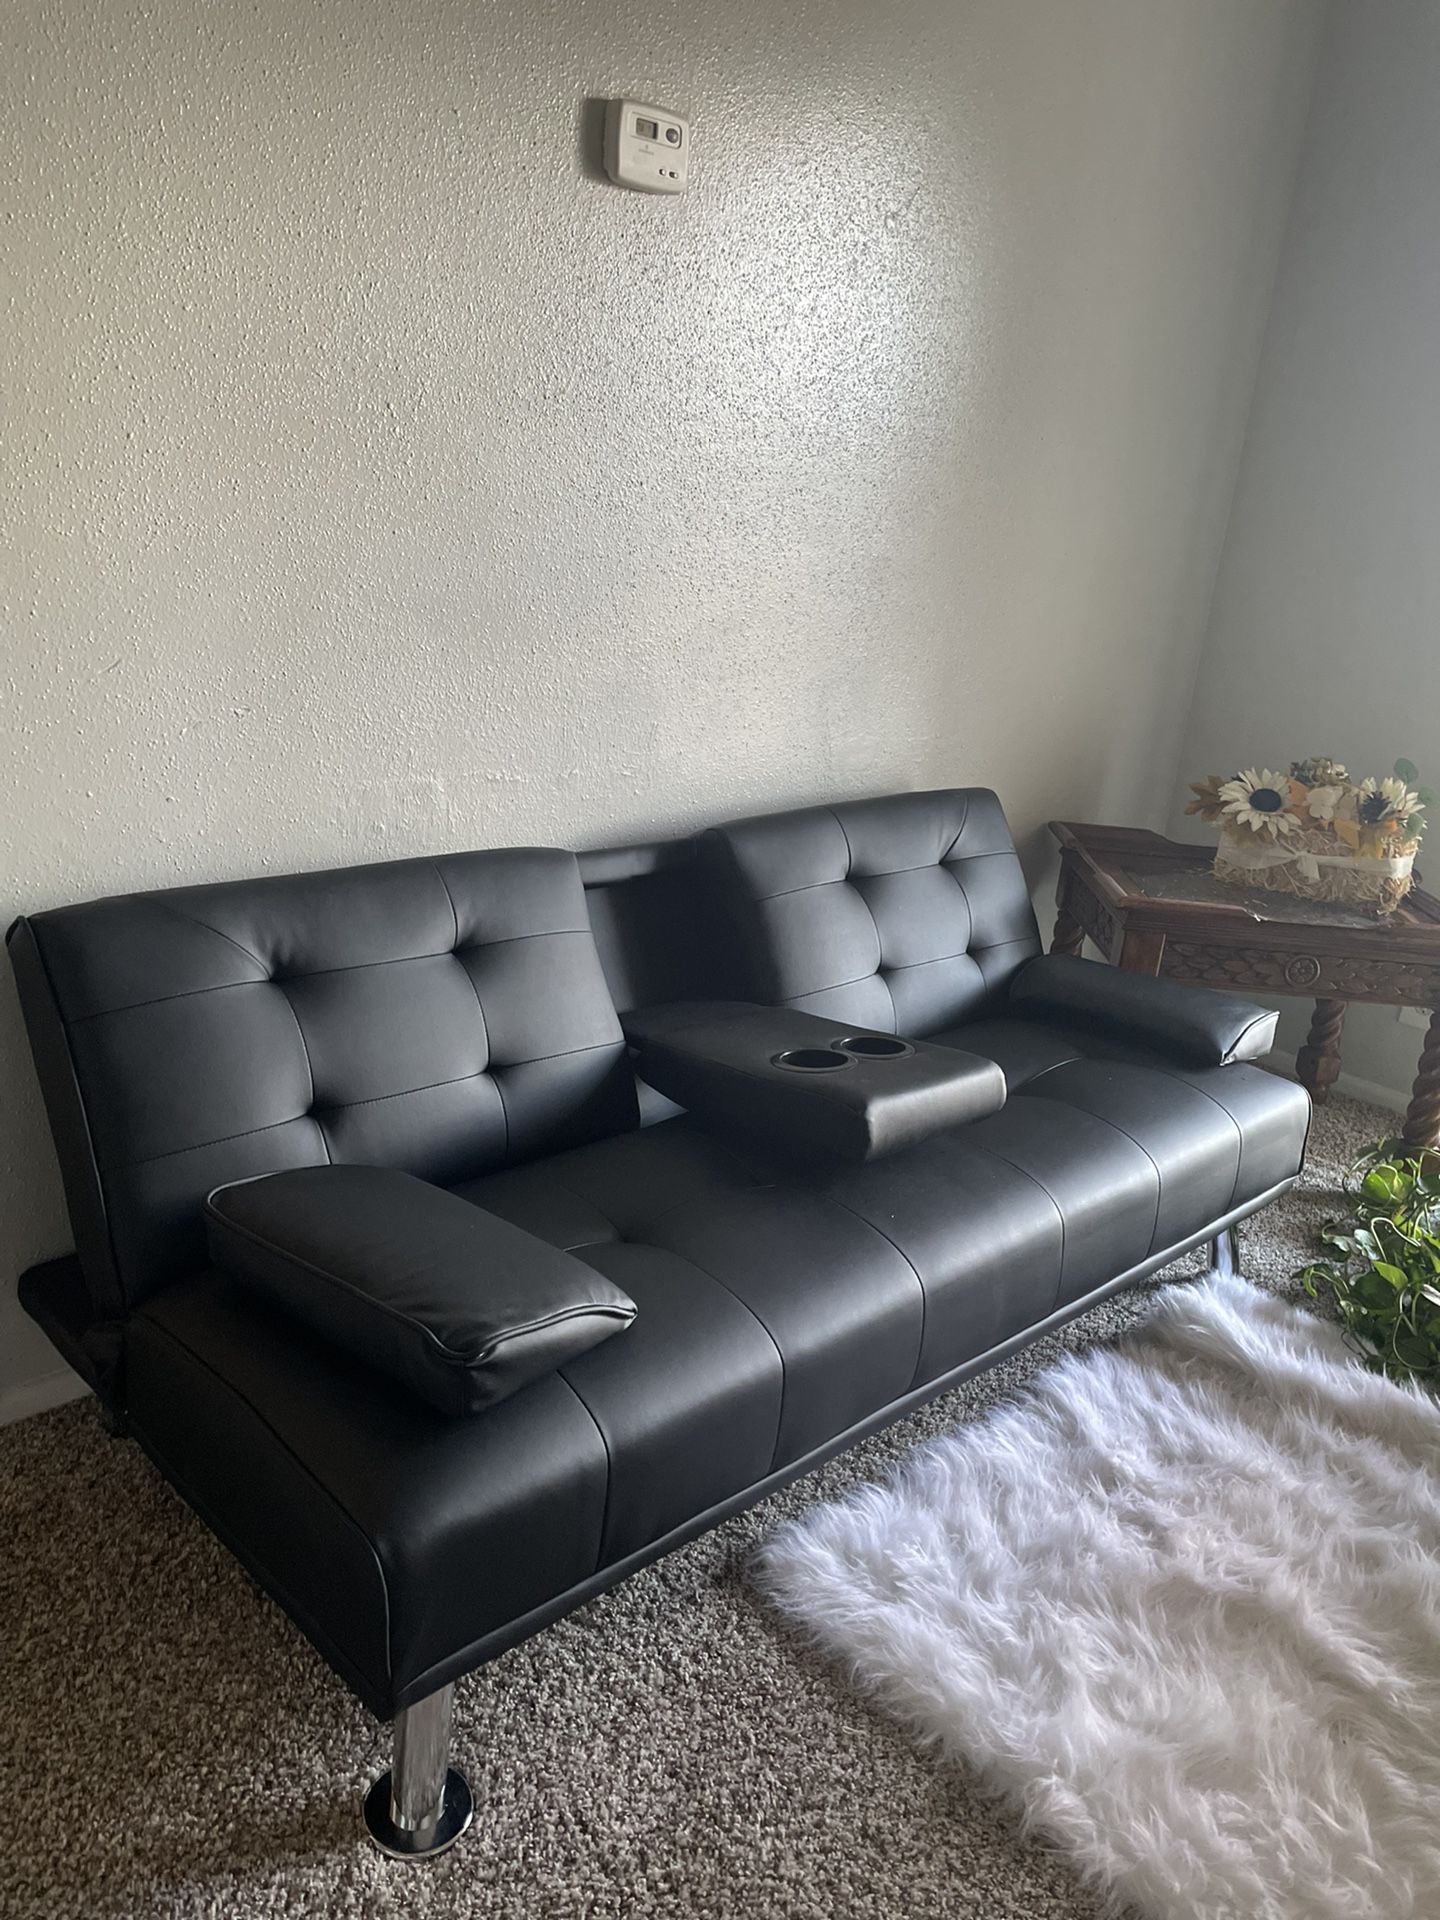 Leather Couch For In San Antonio, Leather Couches San Antonio Tx